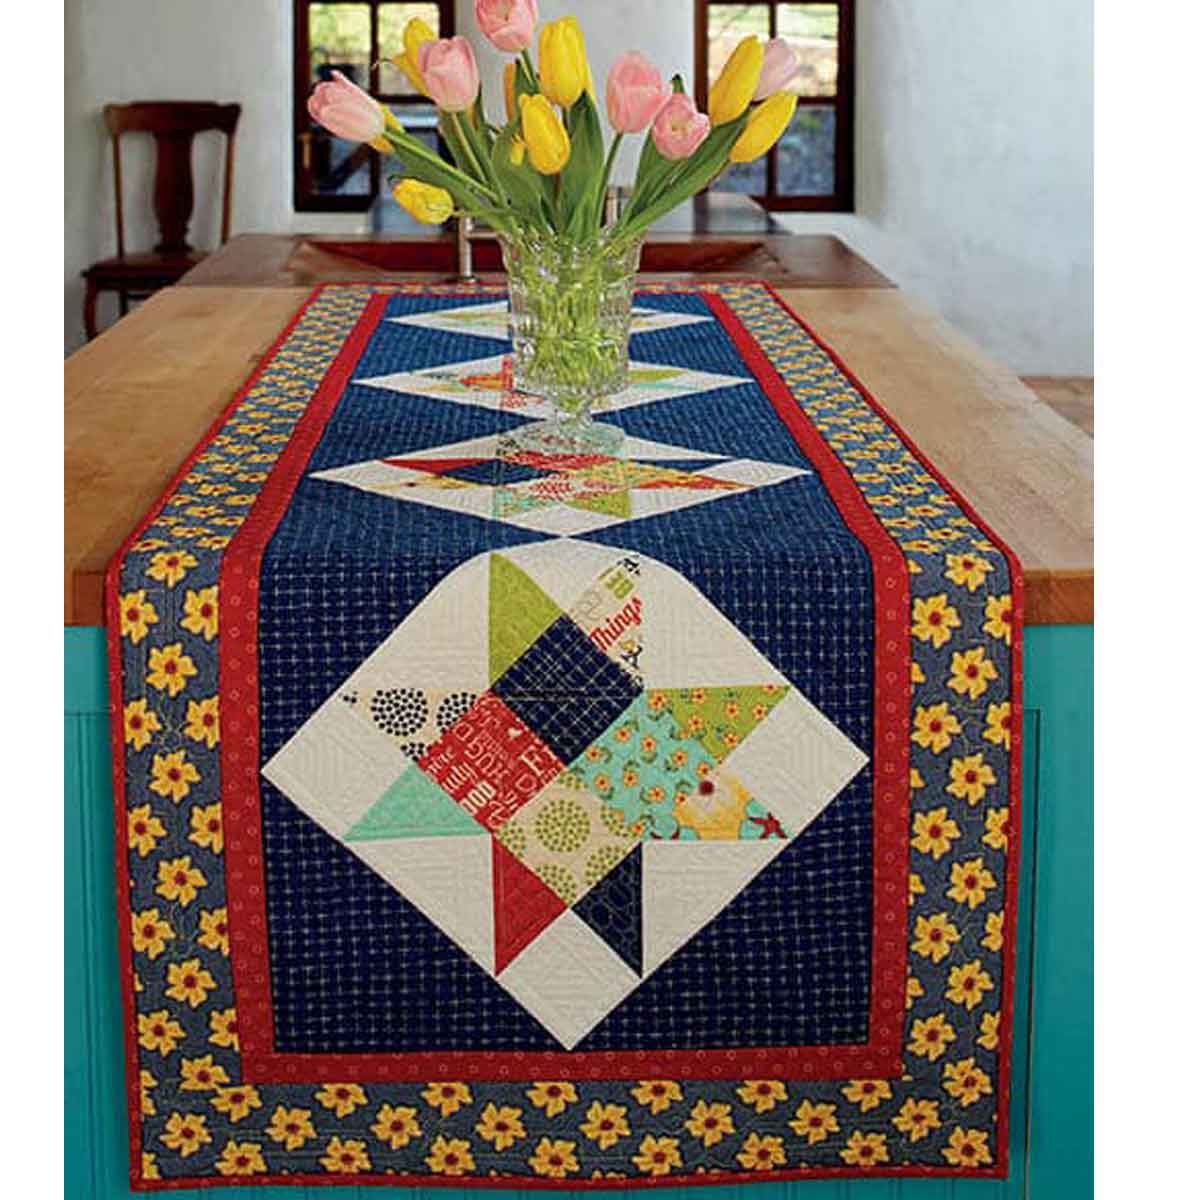 13 Quilted Projects to Spice Up Your Table – Book Review